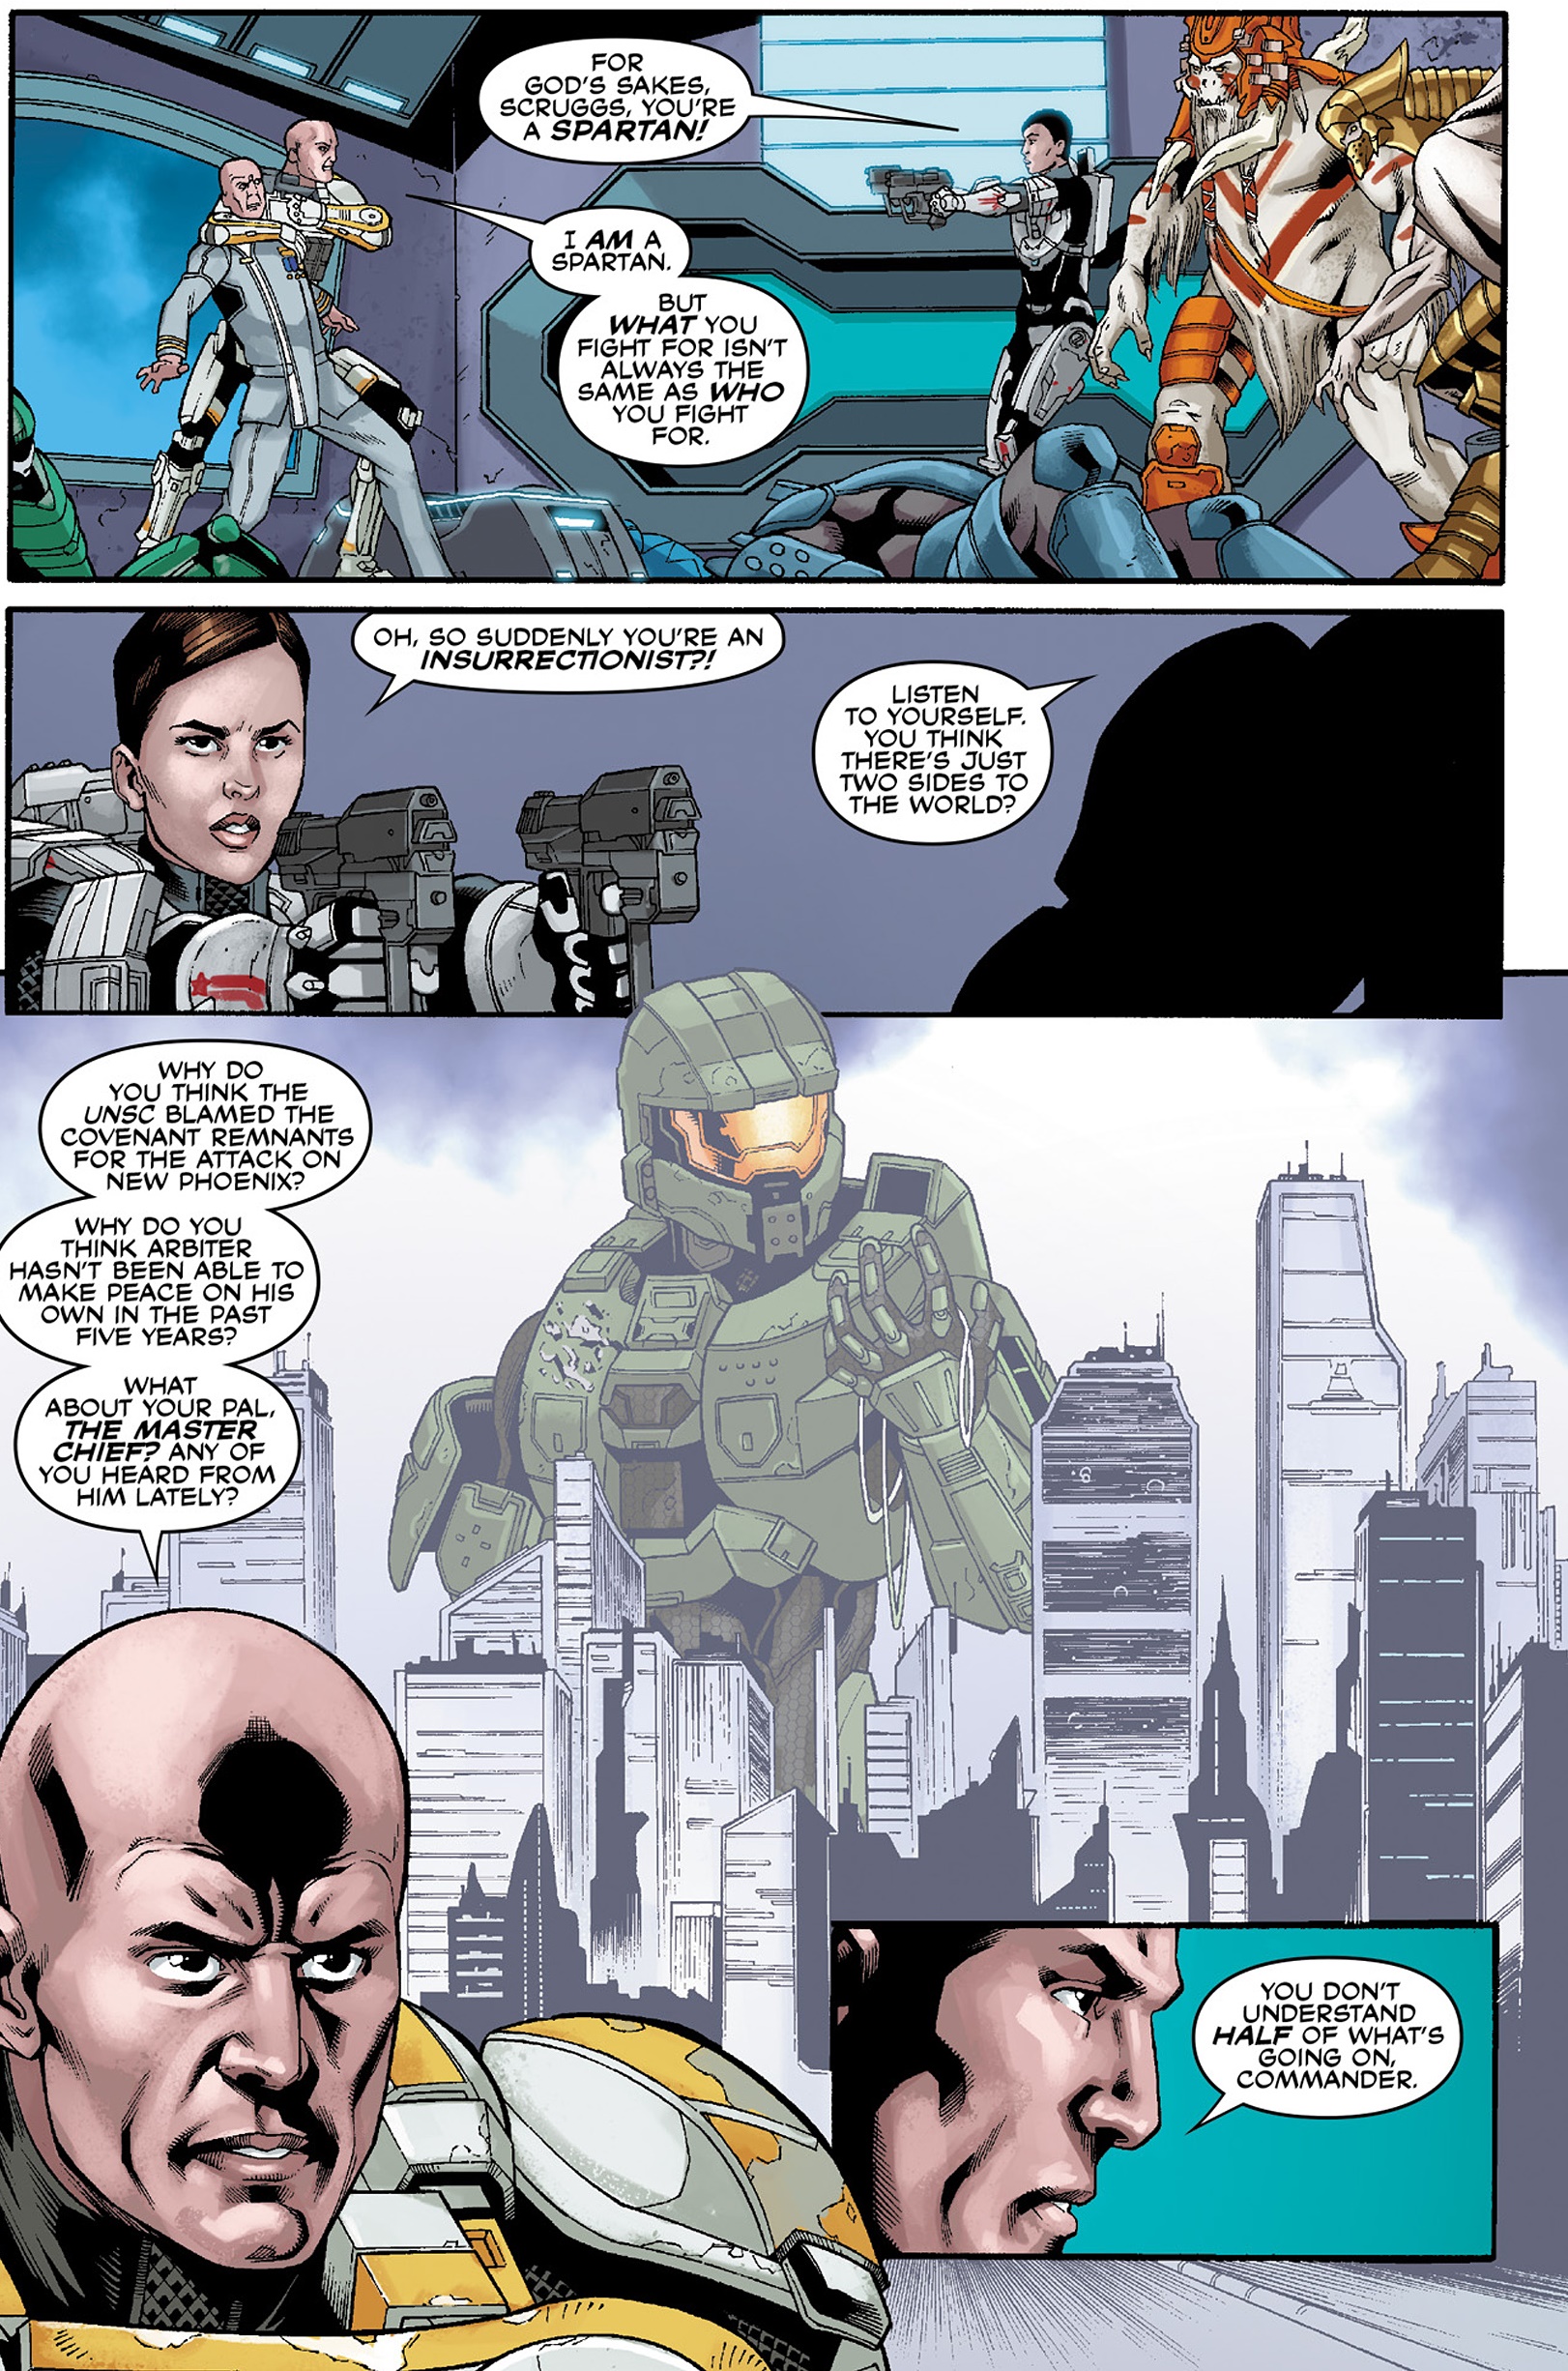 Halo: Escalation Issue #3 page depicting a showdown between Spartan Scruggs, who has taken Admiral Hood hostage, and Spartan Palmer, Chieftain Lydus, and Arbiter Thel 'Vadam